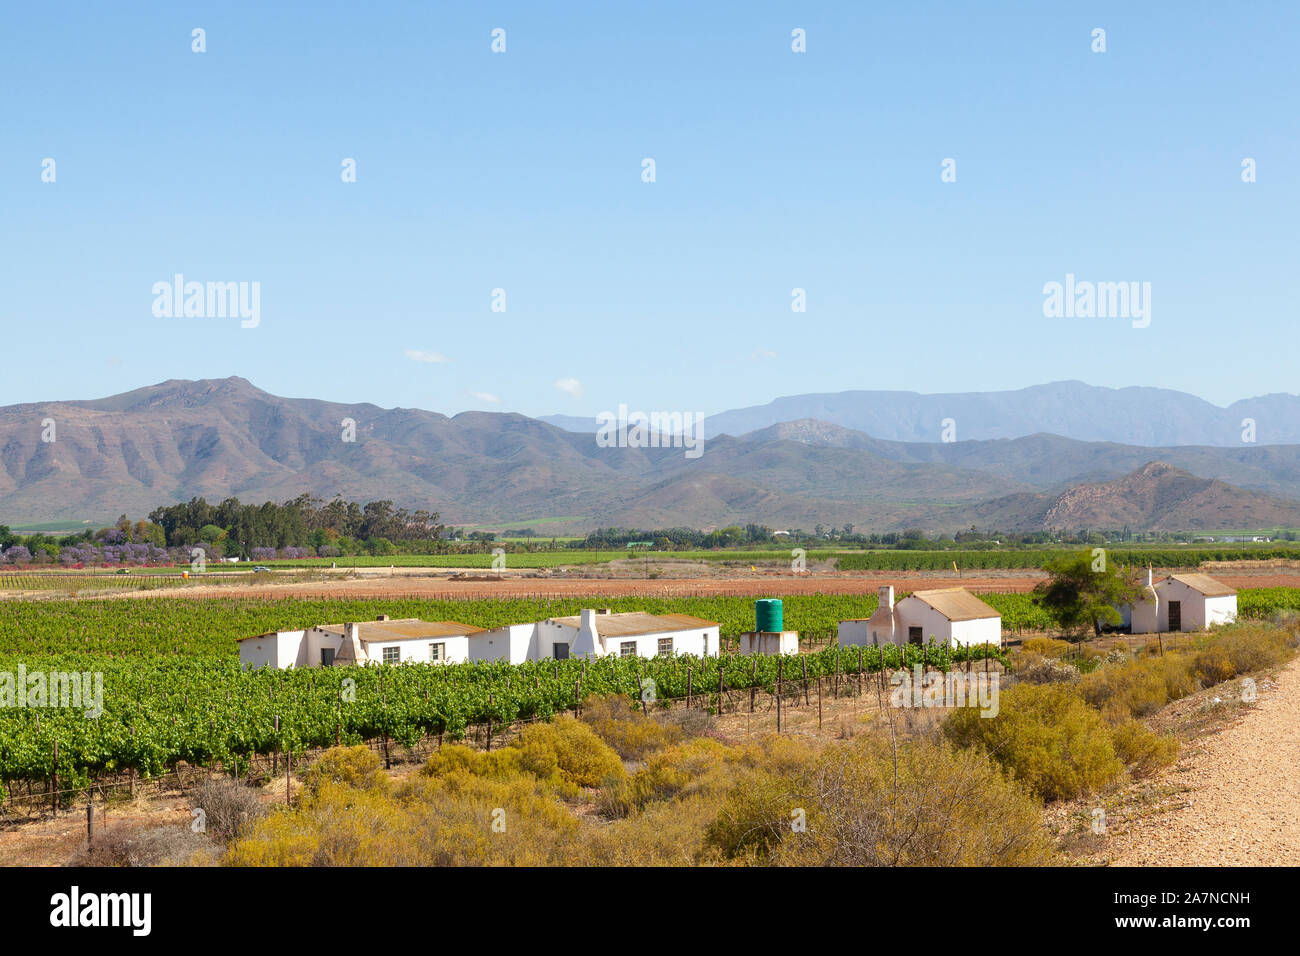 Vineyards in the Robertson Wine Valley, Western Cape Winelands, South Africa in spring. Riviersonderend Mountains with farm labourers cottages Stock Photo